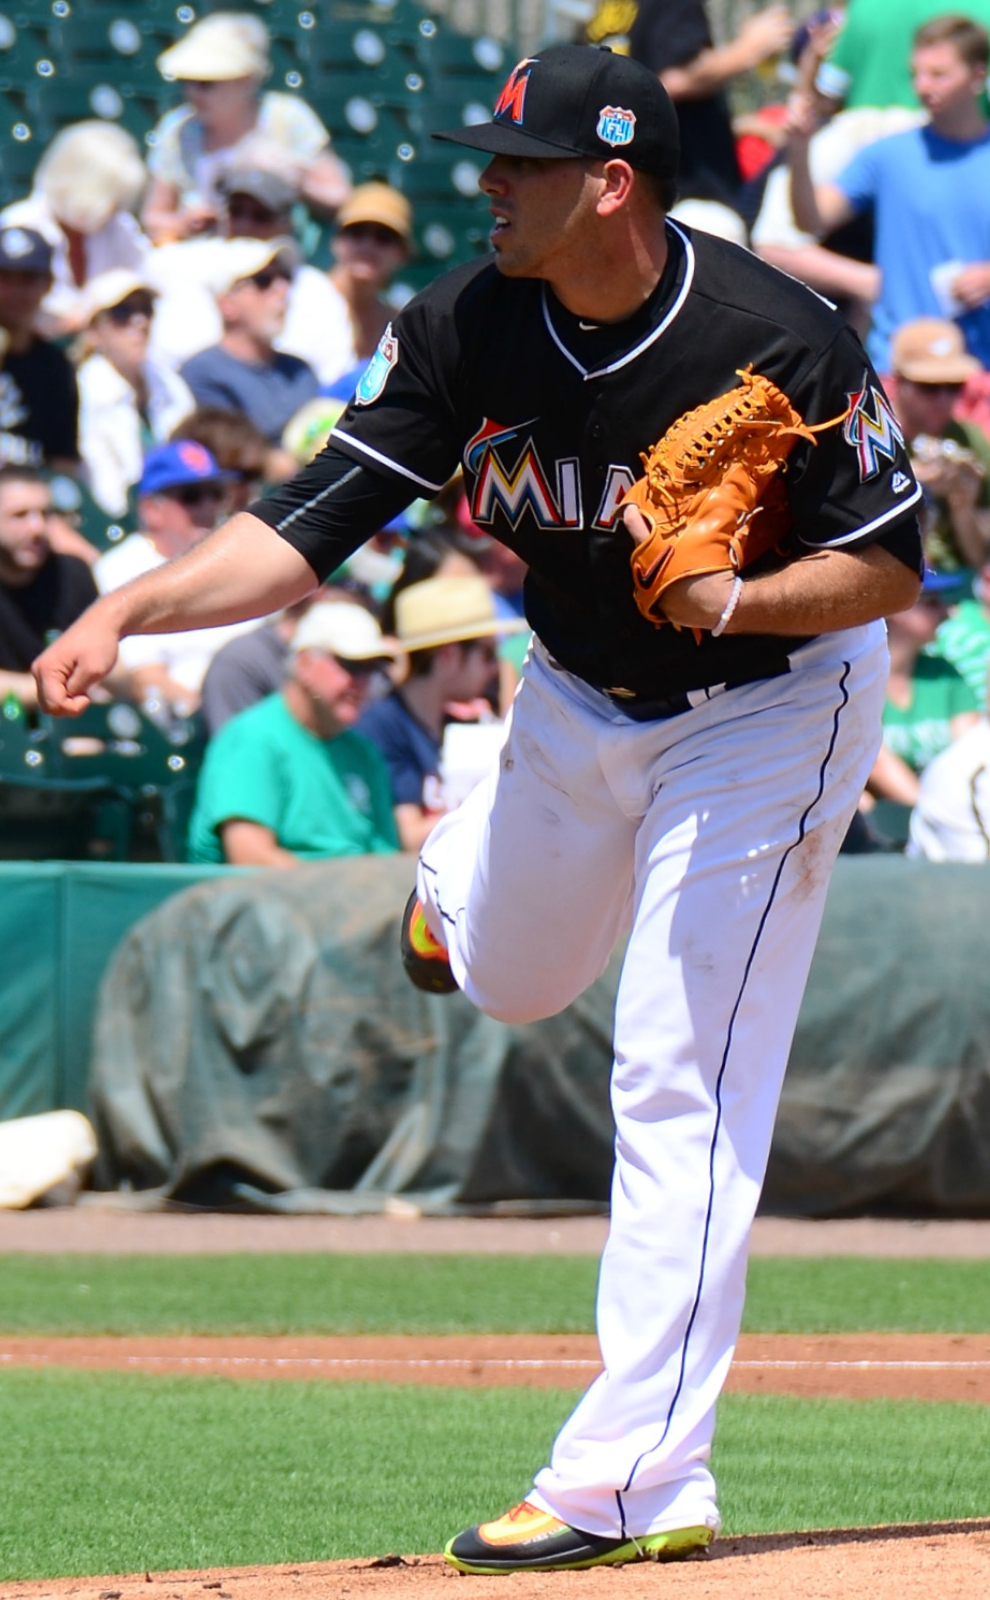 Fernández pitching for the Miami Marlins in 2016 spring training. By slgckgc on Flickr (Original version)UCinternational (Crop) - Originally posted to Flickr as "Jose Fernandea"Cropped by UCinternational, CC BY 2.0, https://commons.wikimedia.org/w/index.php?curid=47944418